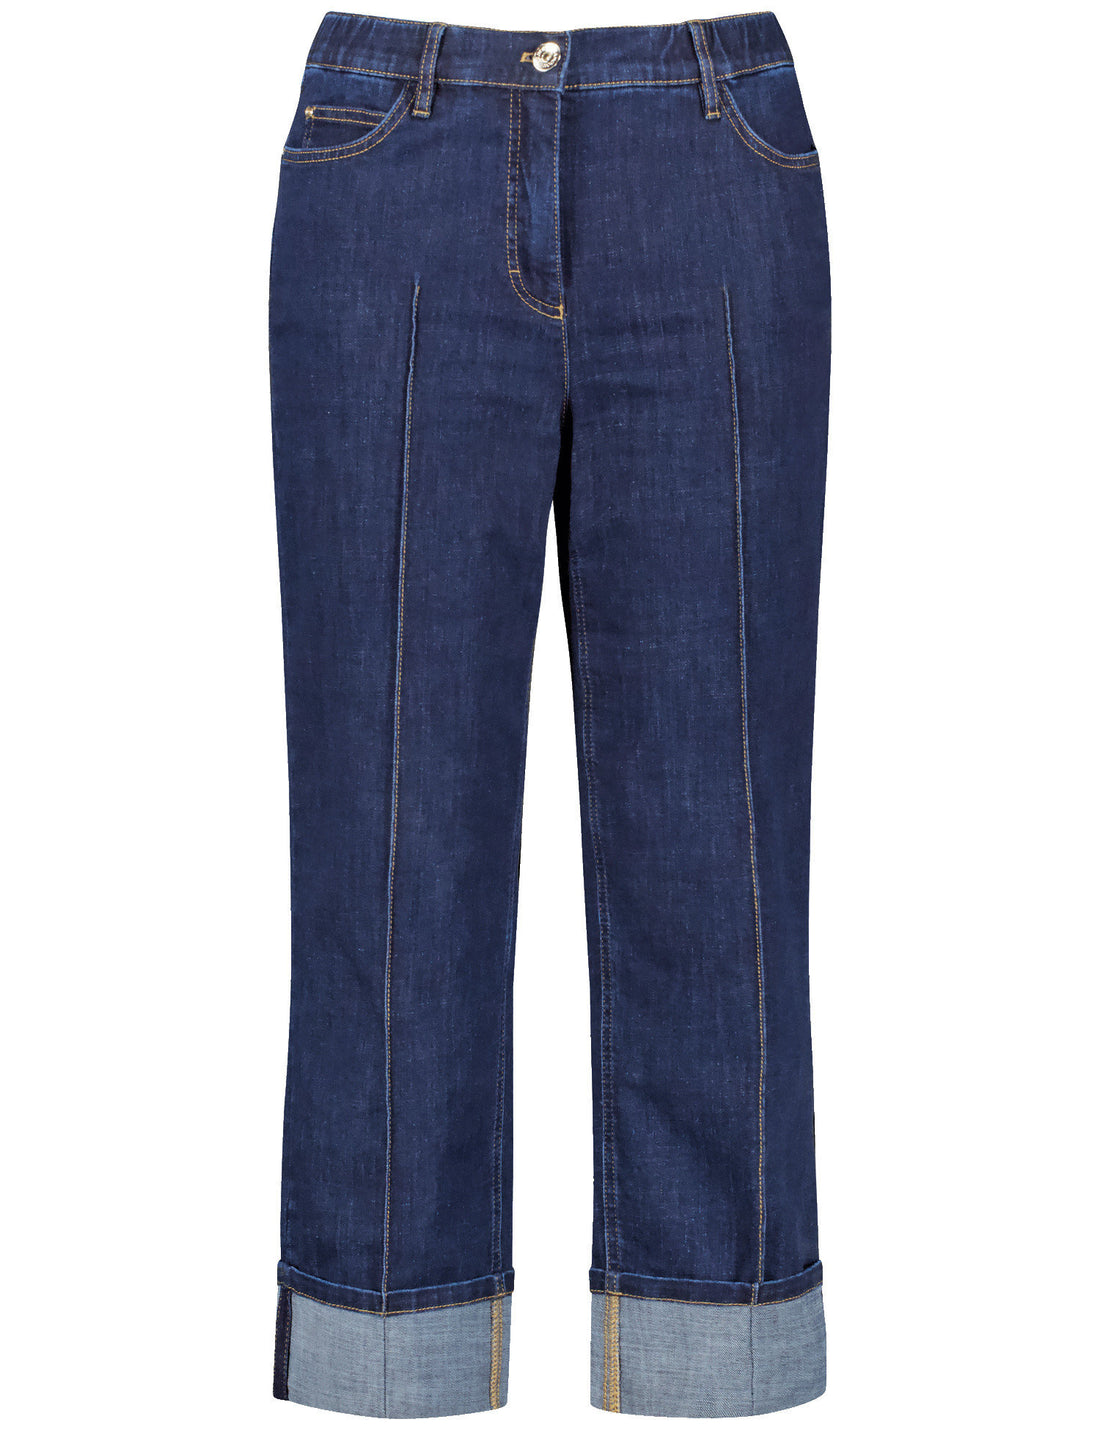 7/8-Length Jeans With Contrasting Topstitching_420039-21402_8999_02